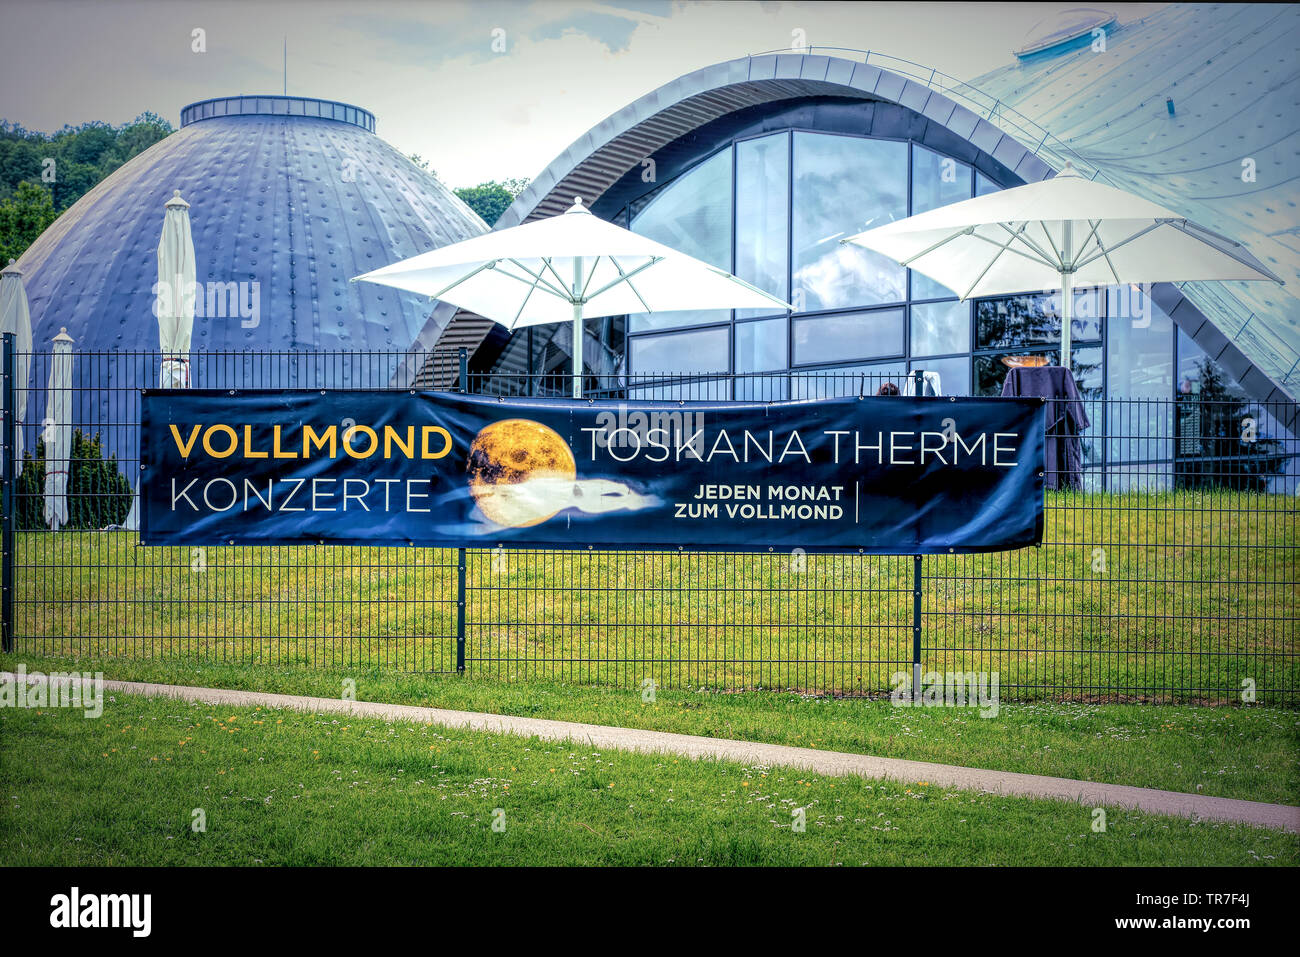 Toskana Therme in spa park of Bad Orb; Sign:Vollmond, Konzerte, Jeden Monat zum Vollmond Full Moon, Concerts, Every Month to Full Moon Stock Photo